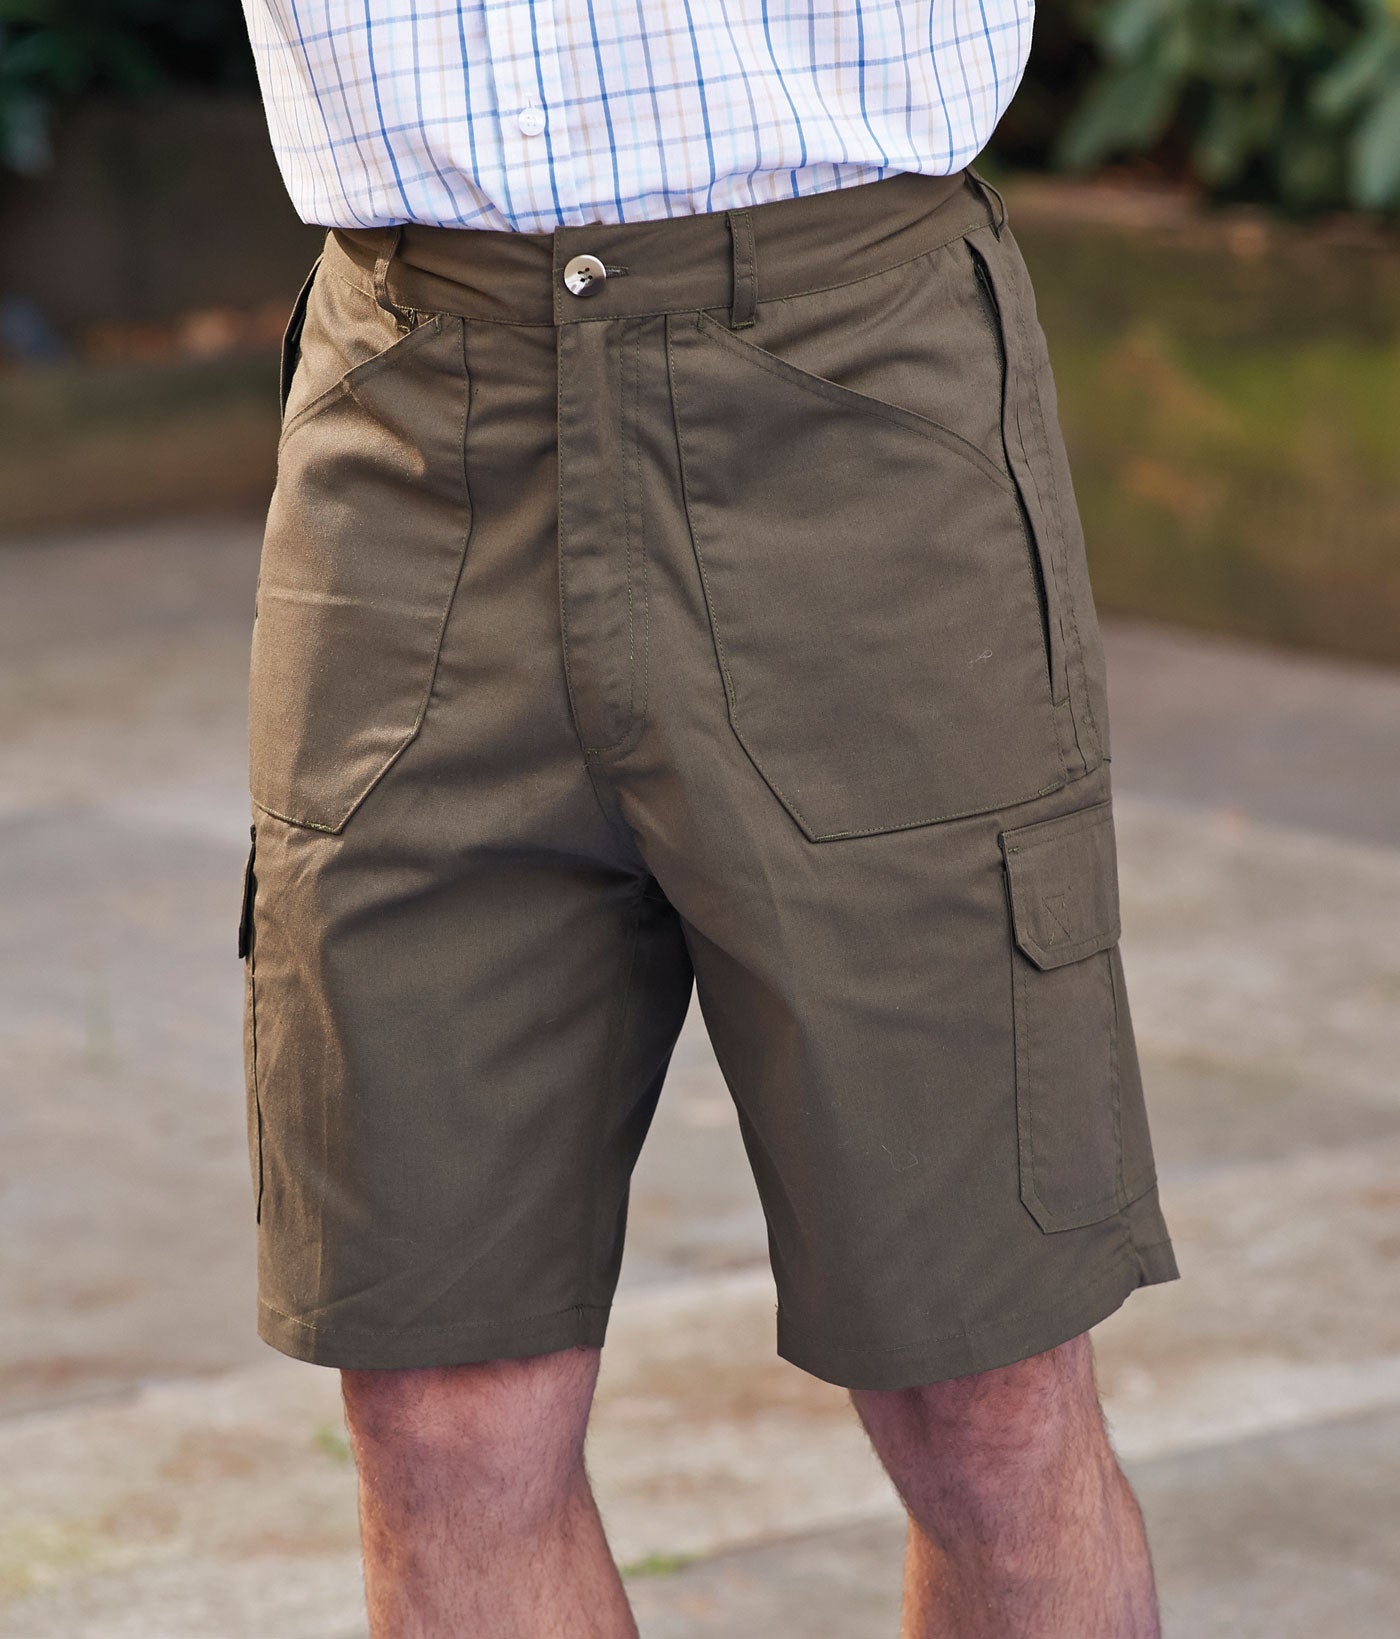 Champion shorts with lots of pockets 